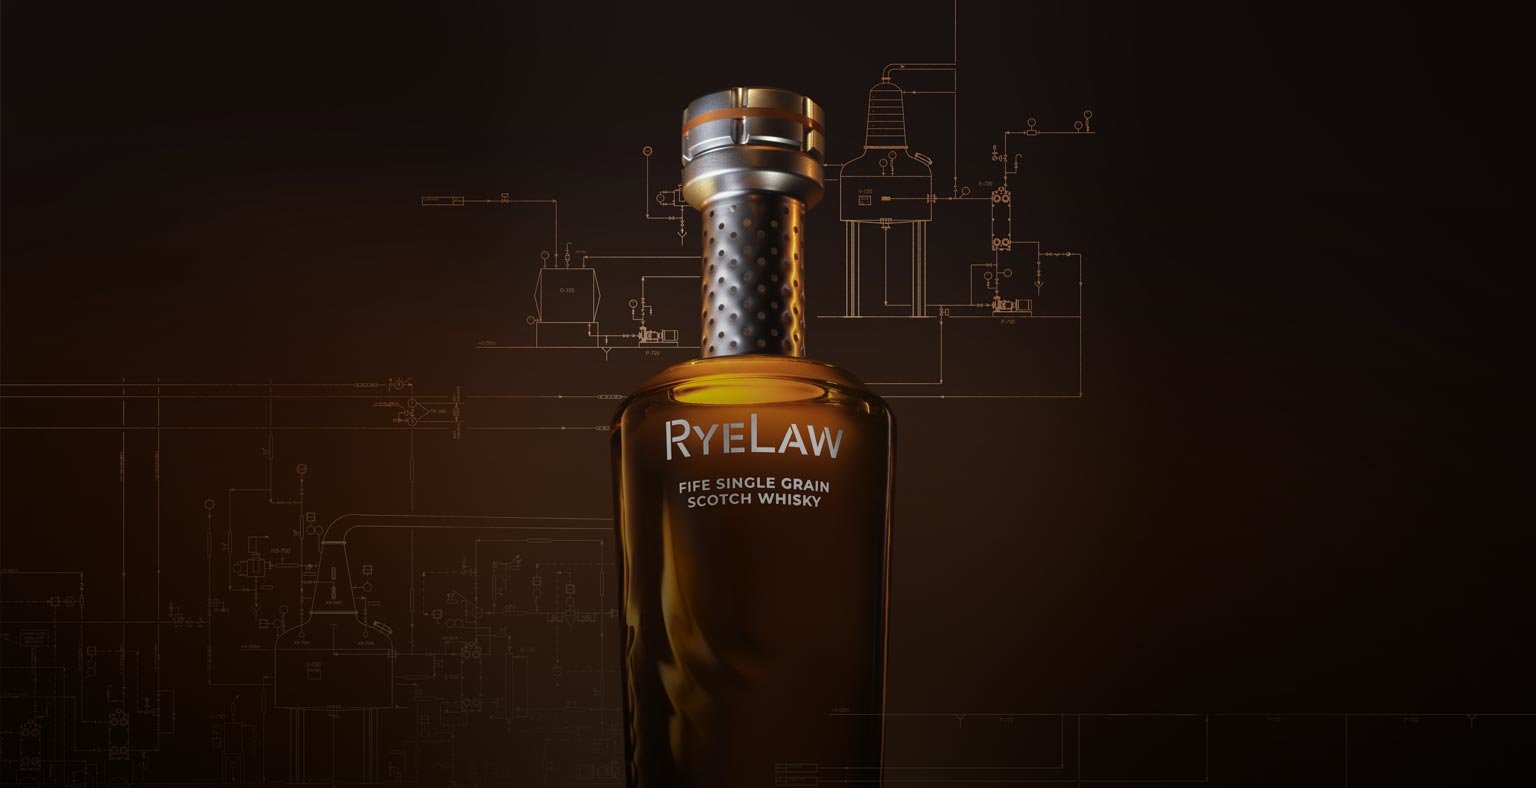 A bottle of Ryelaw Fife whisky against a brown background